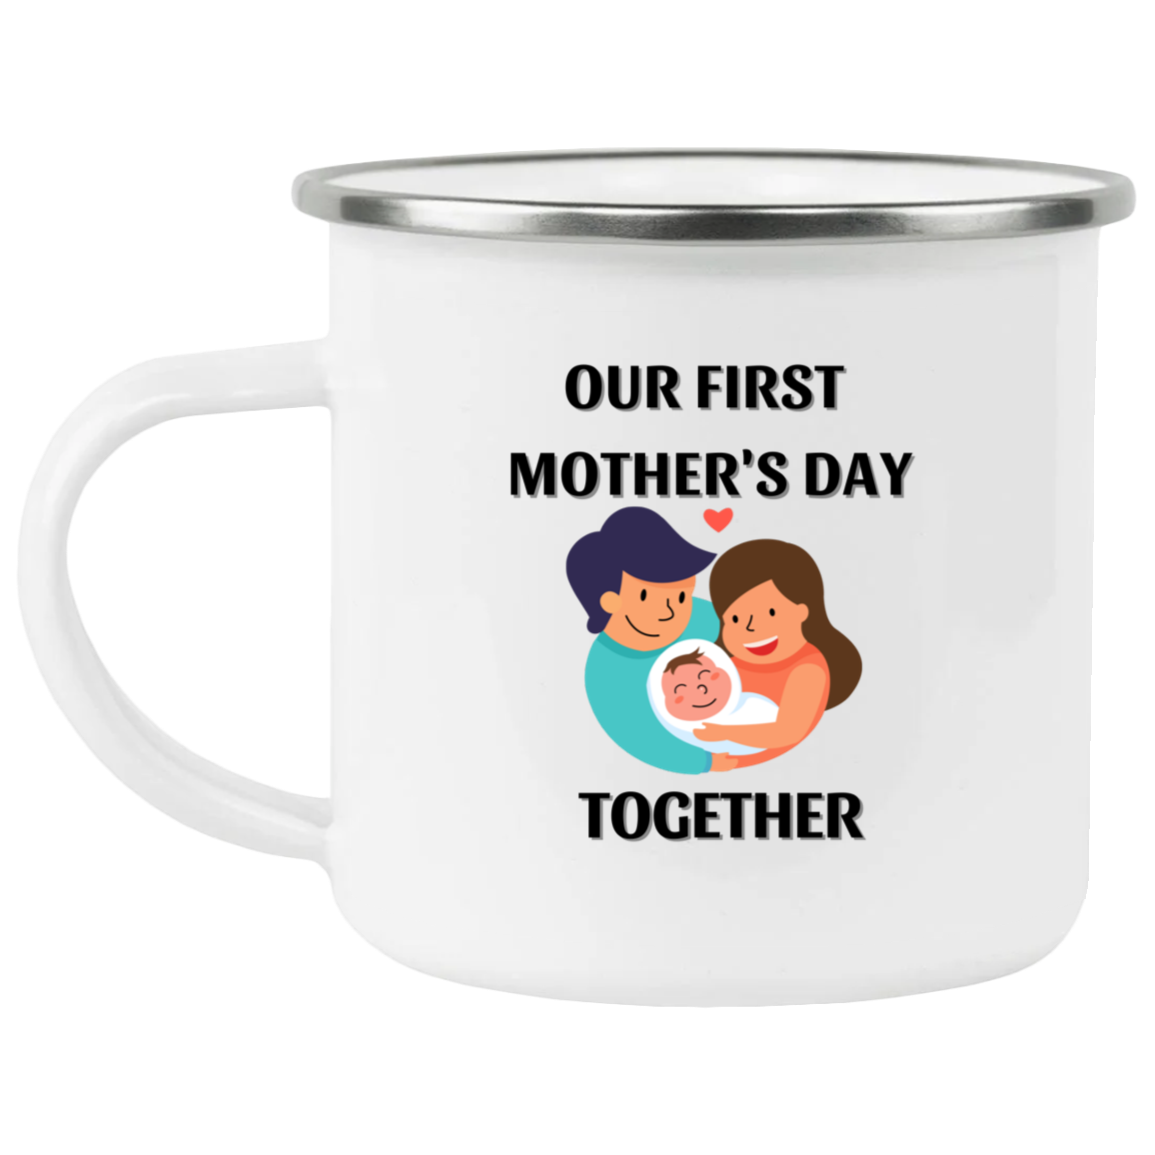 Our First Mother's Day Together  Mug